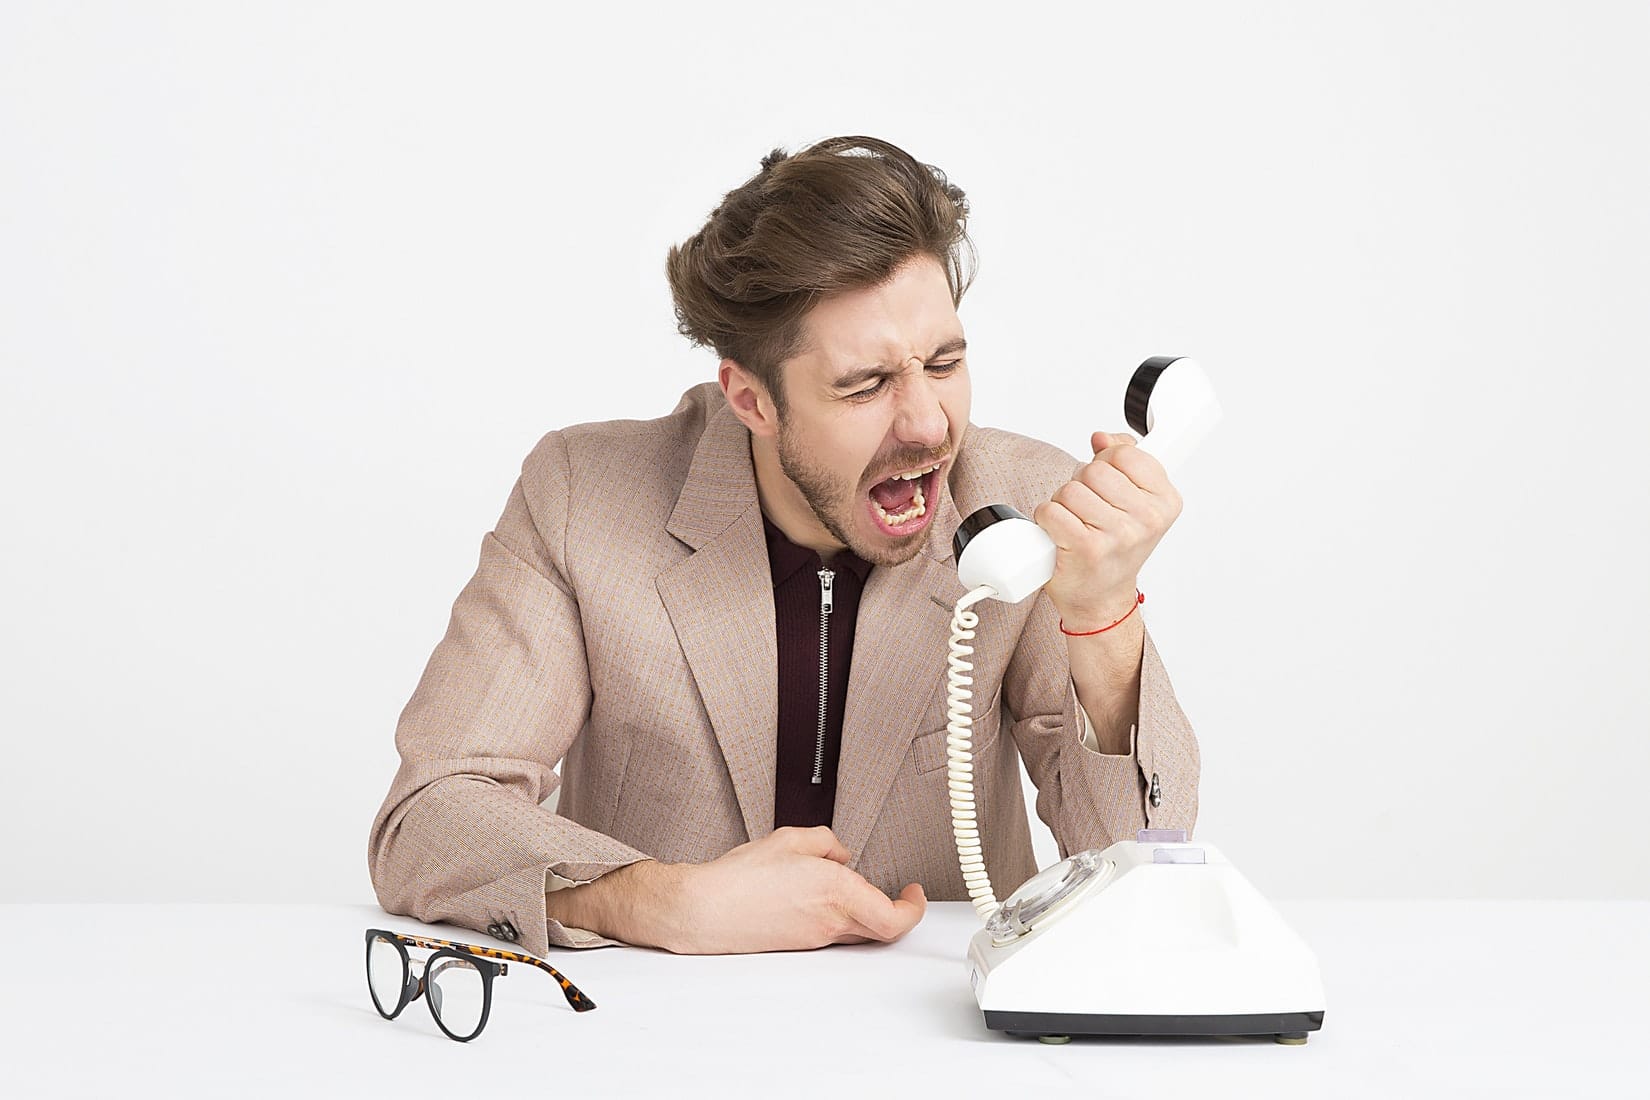 Angry man in a suit, sitting on his desk, screaming into a telephone.